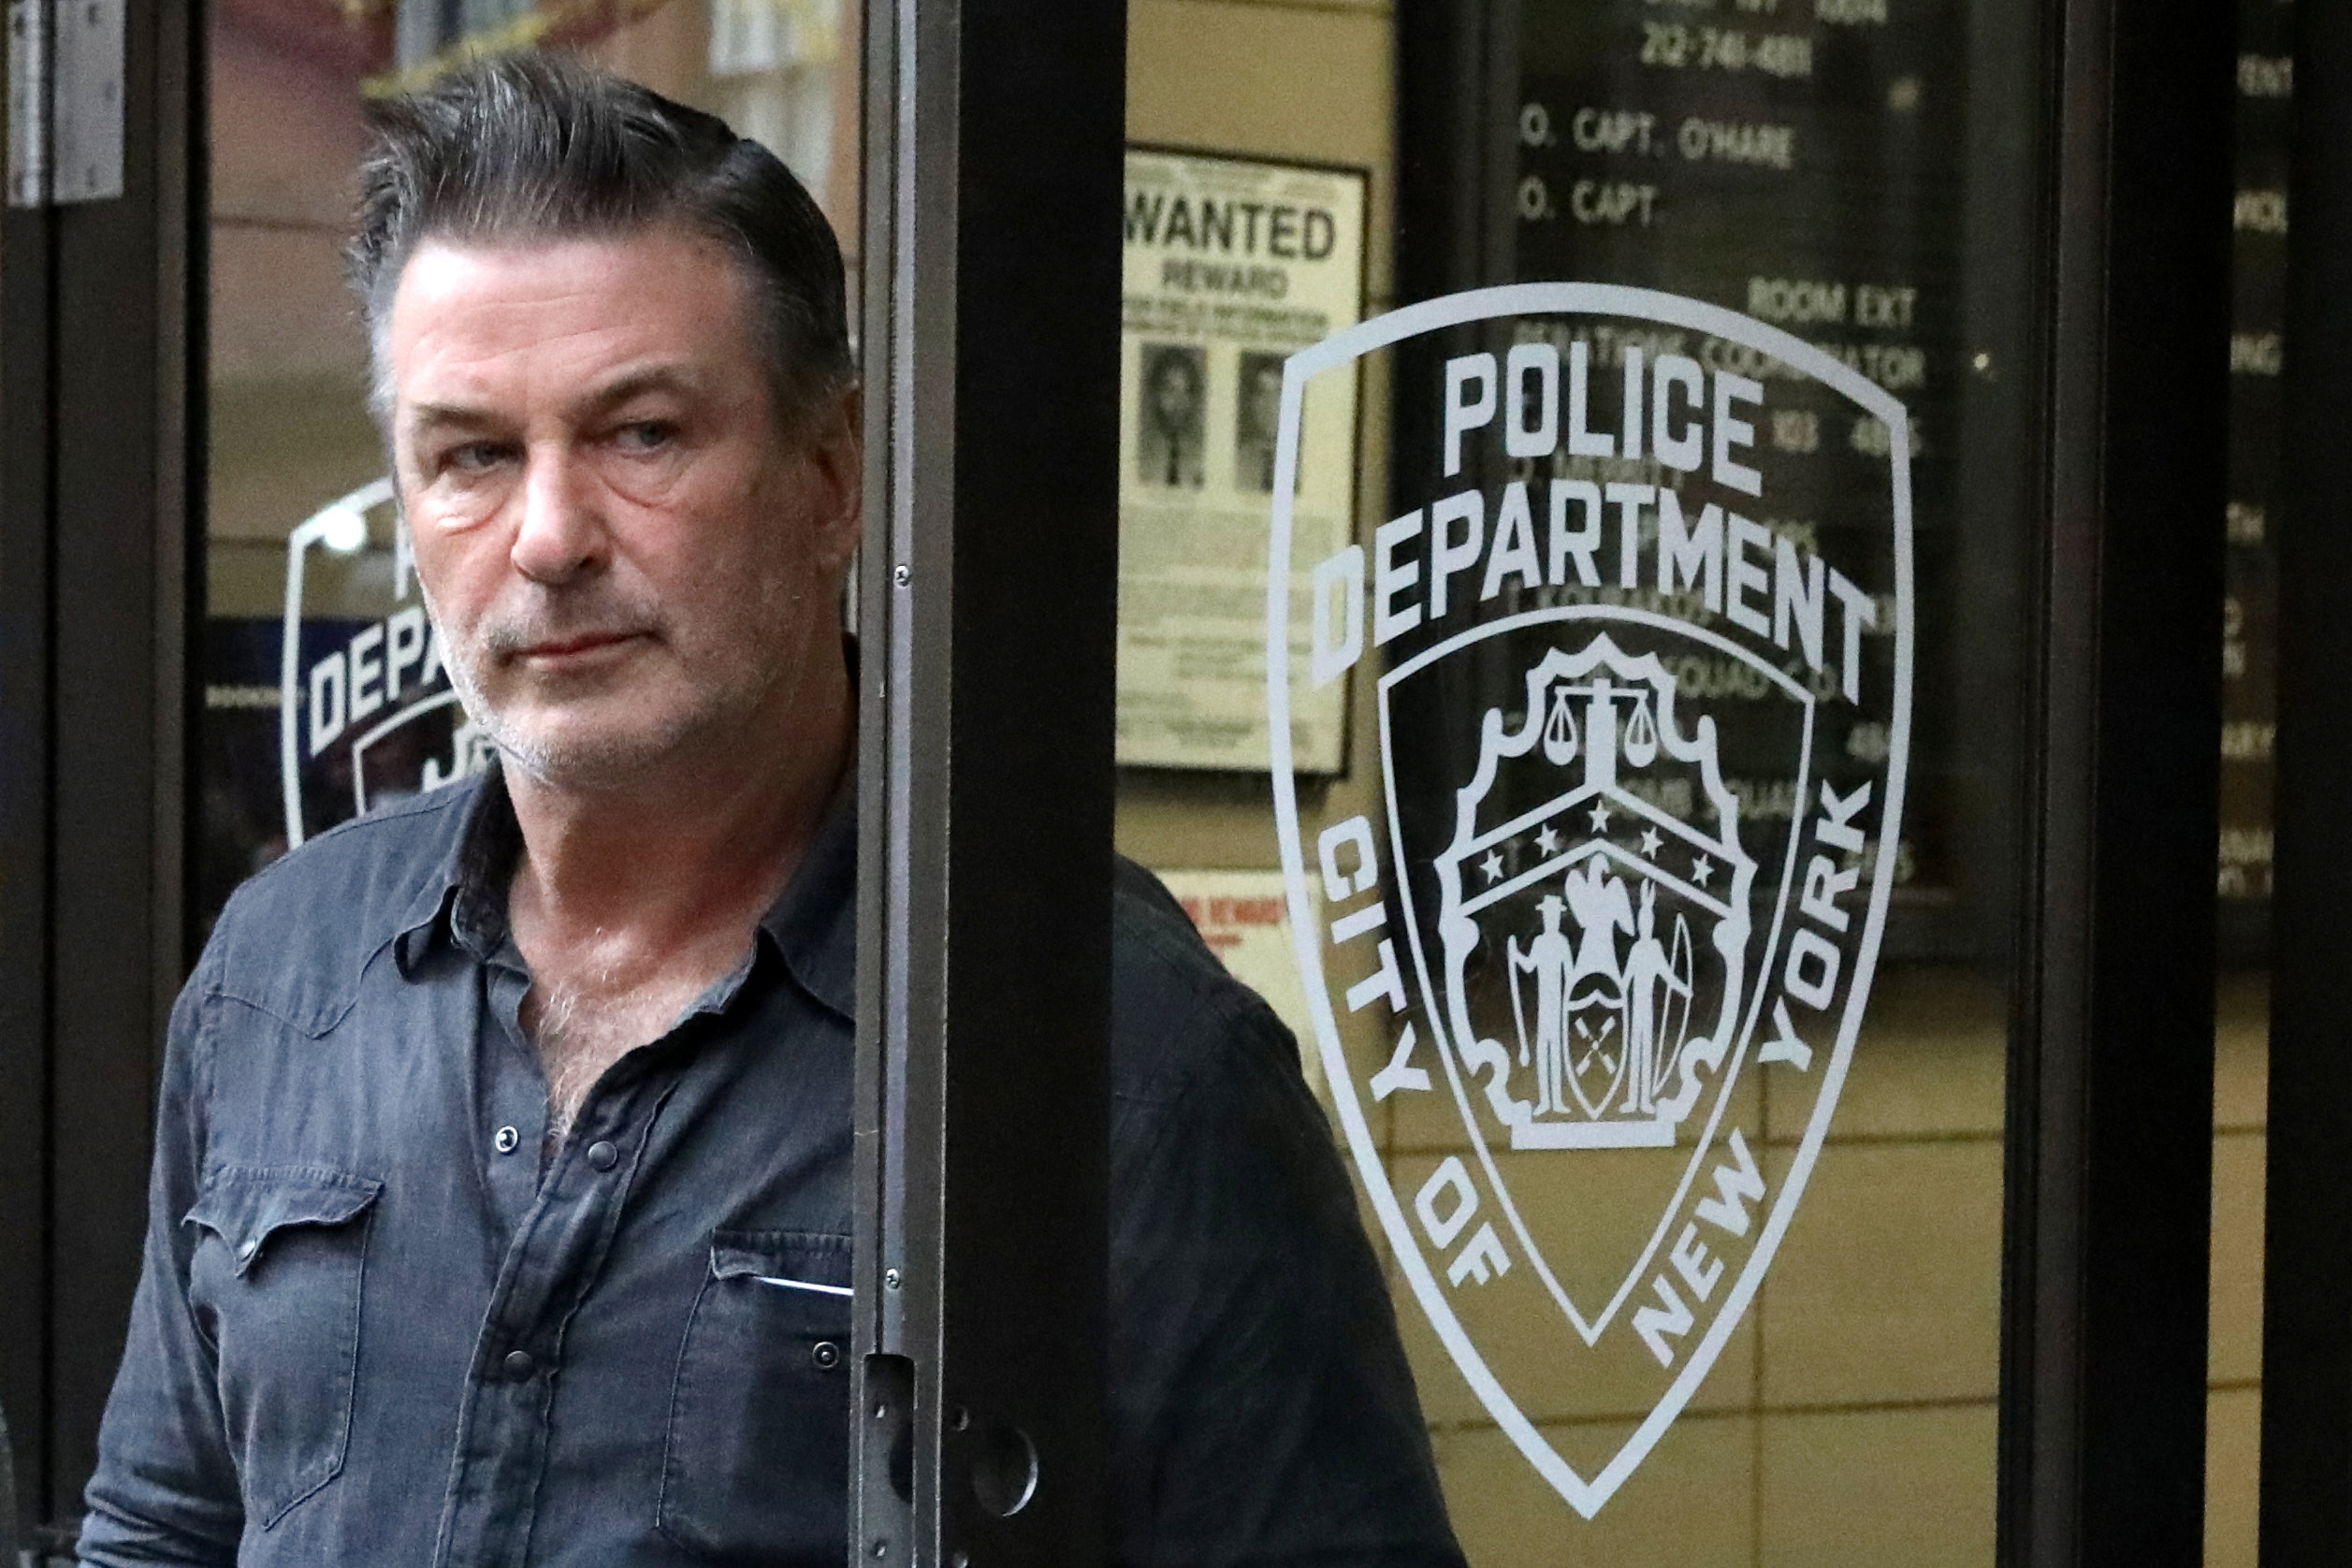 PHOTO: In this Nov. 2, 2018, file photo, Alec Baldwin exits the 6th precinct of the New York Police Department in New York.